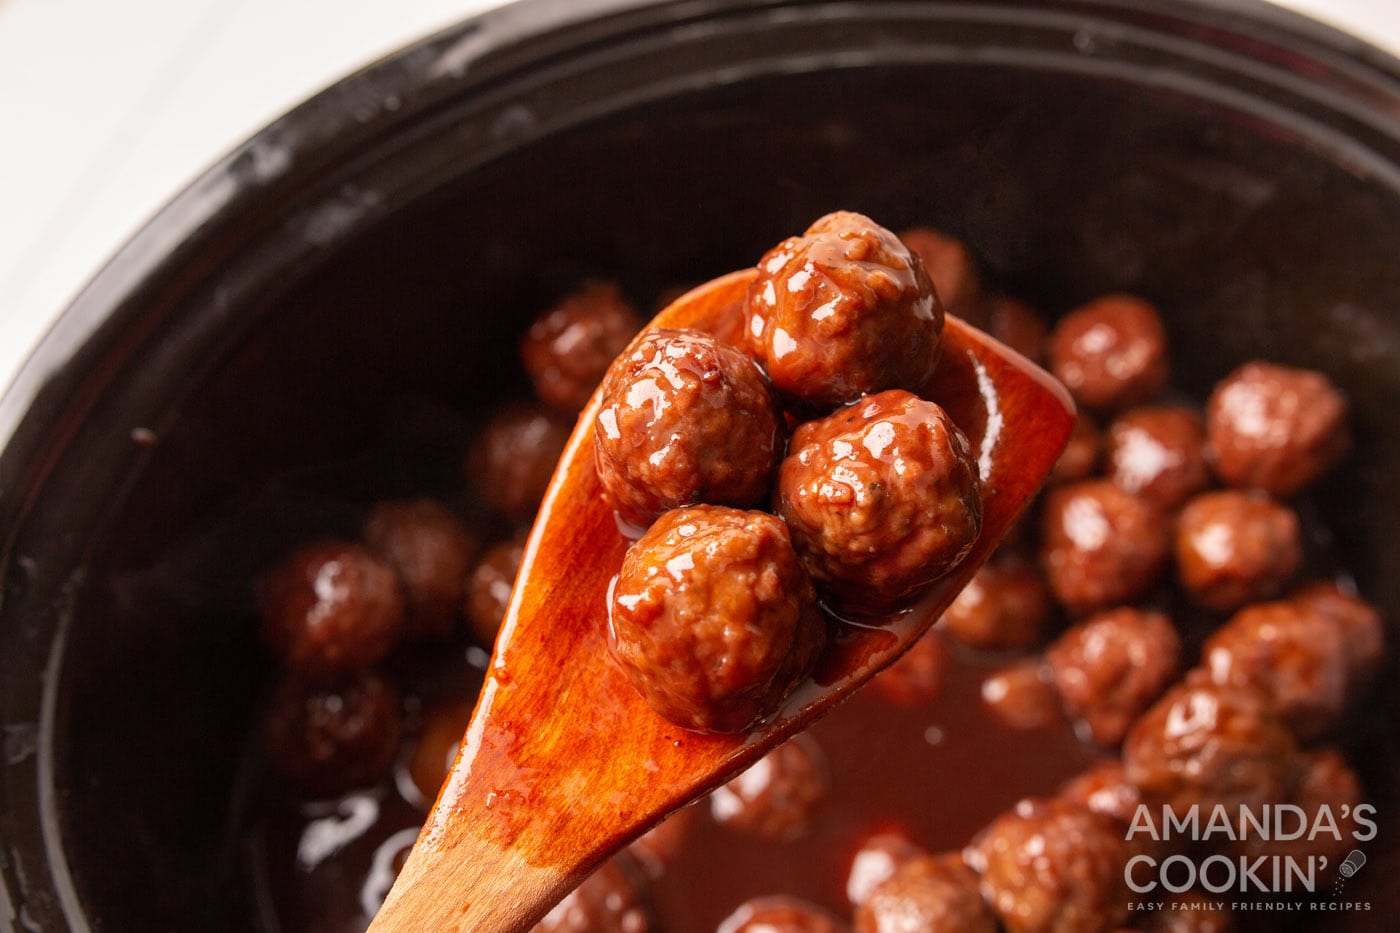 The sweet and spicy combination of these grape jelly meatballs tickles your tastebuds, encouraging y